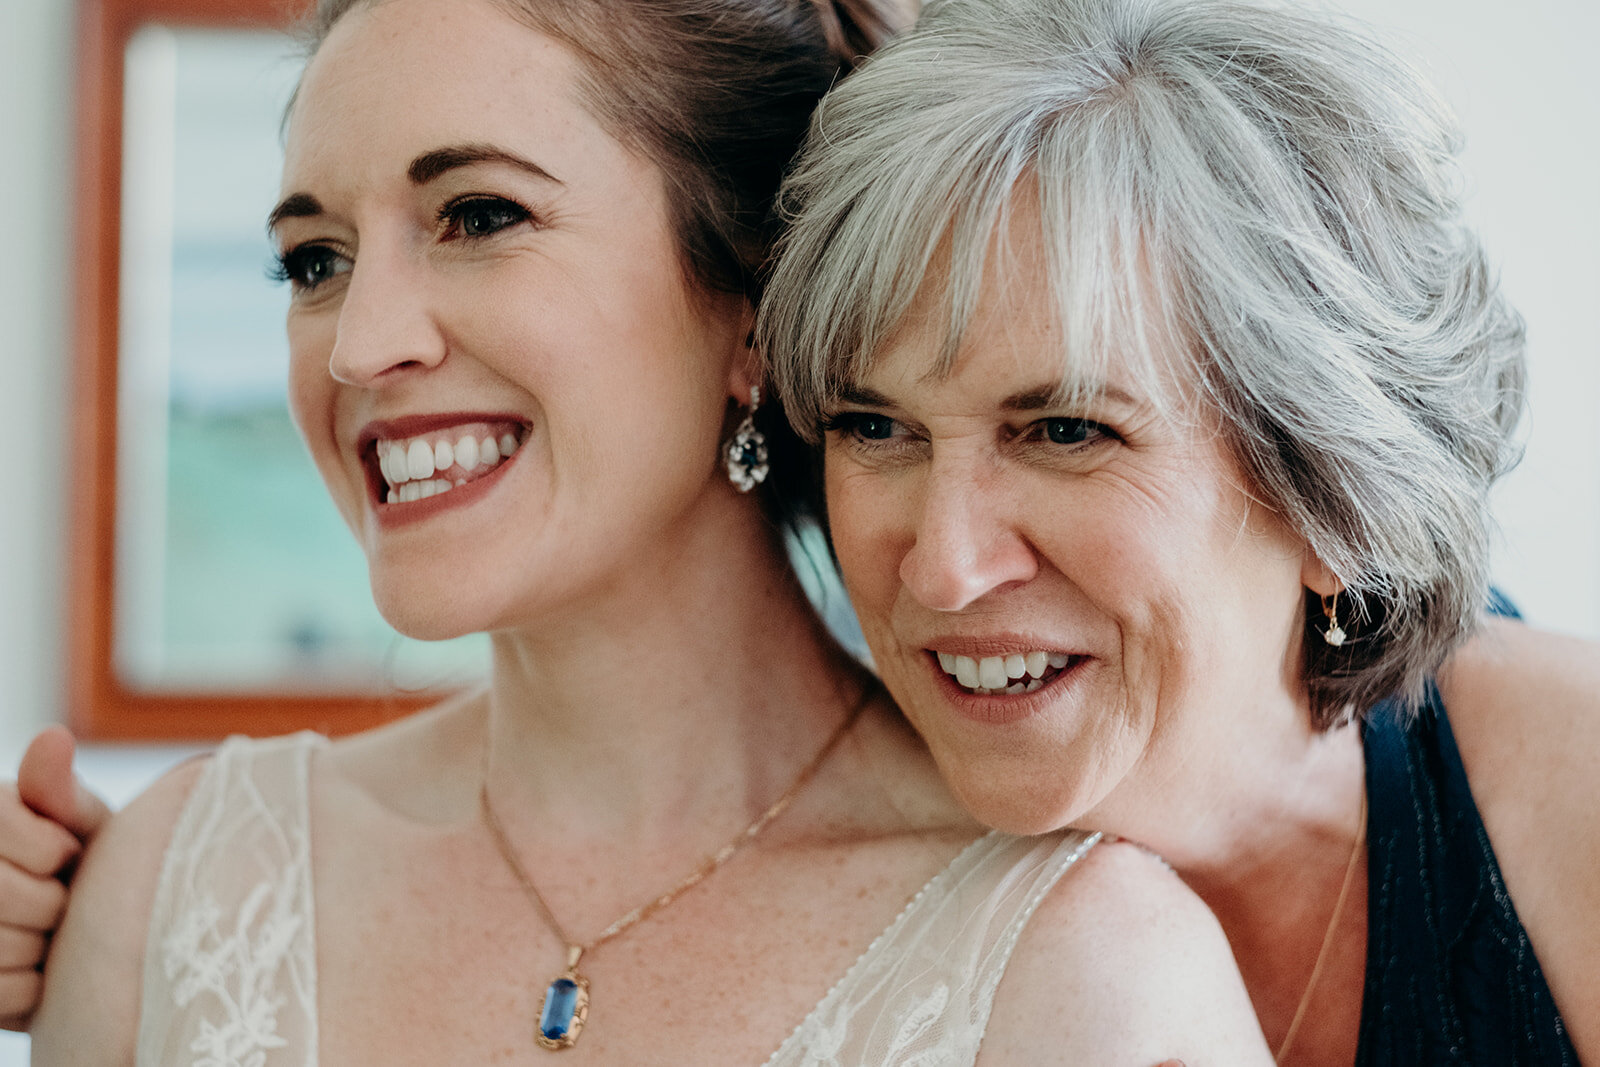 The mother of the bride gives her daughter a hug after placing on her necklace on her wedding day. 